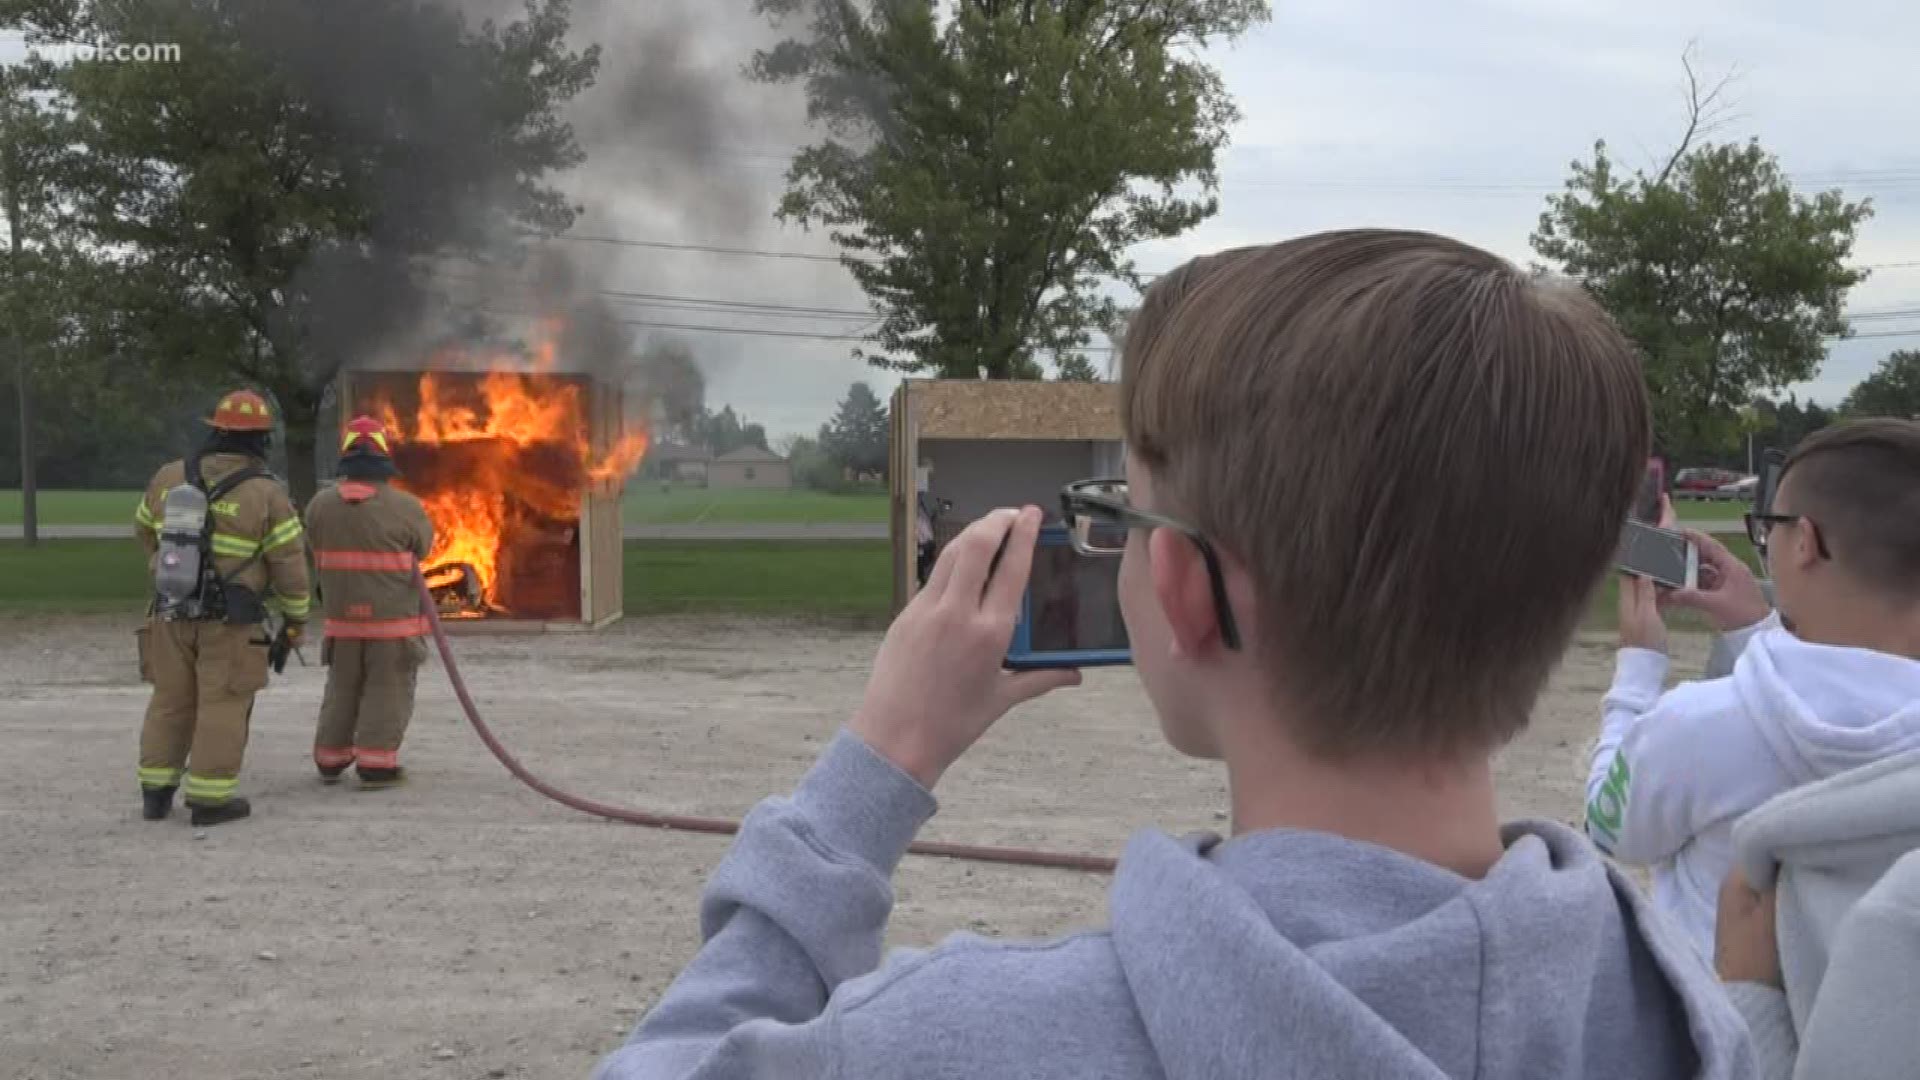 Oregon Fire and Toledo Refining company bring chemistry and forensic lessons to students.